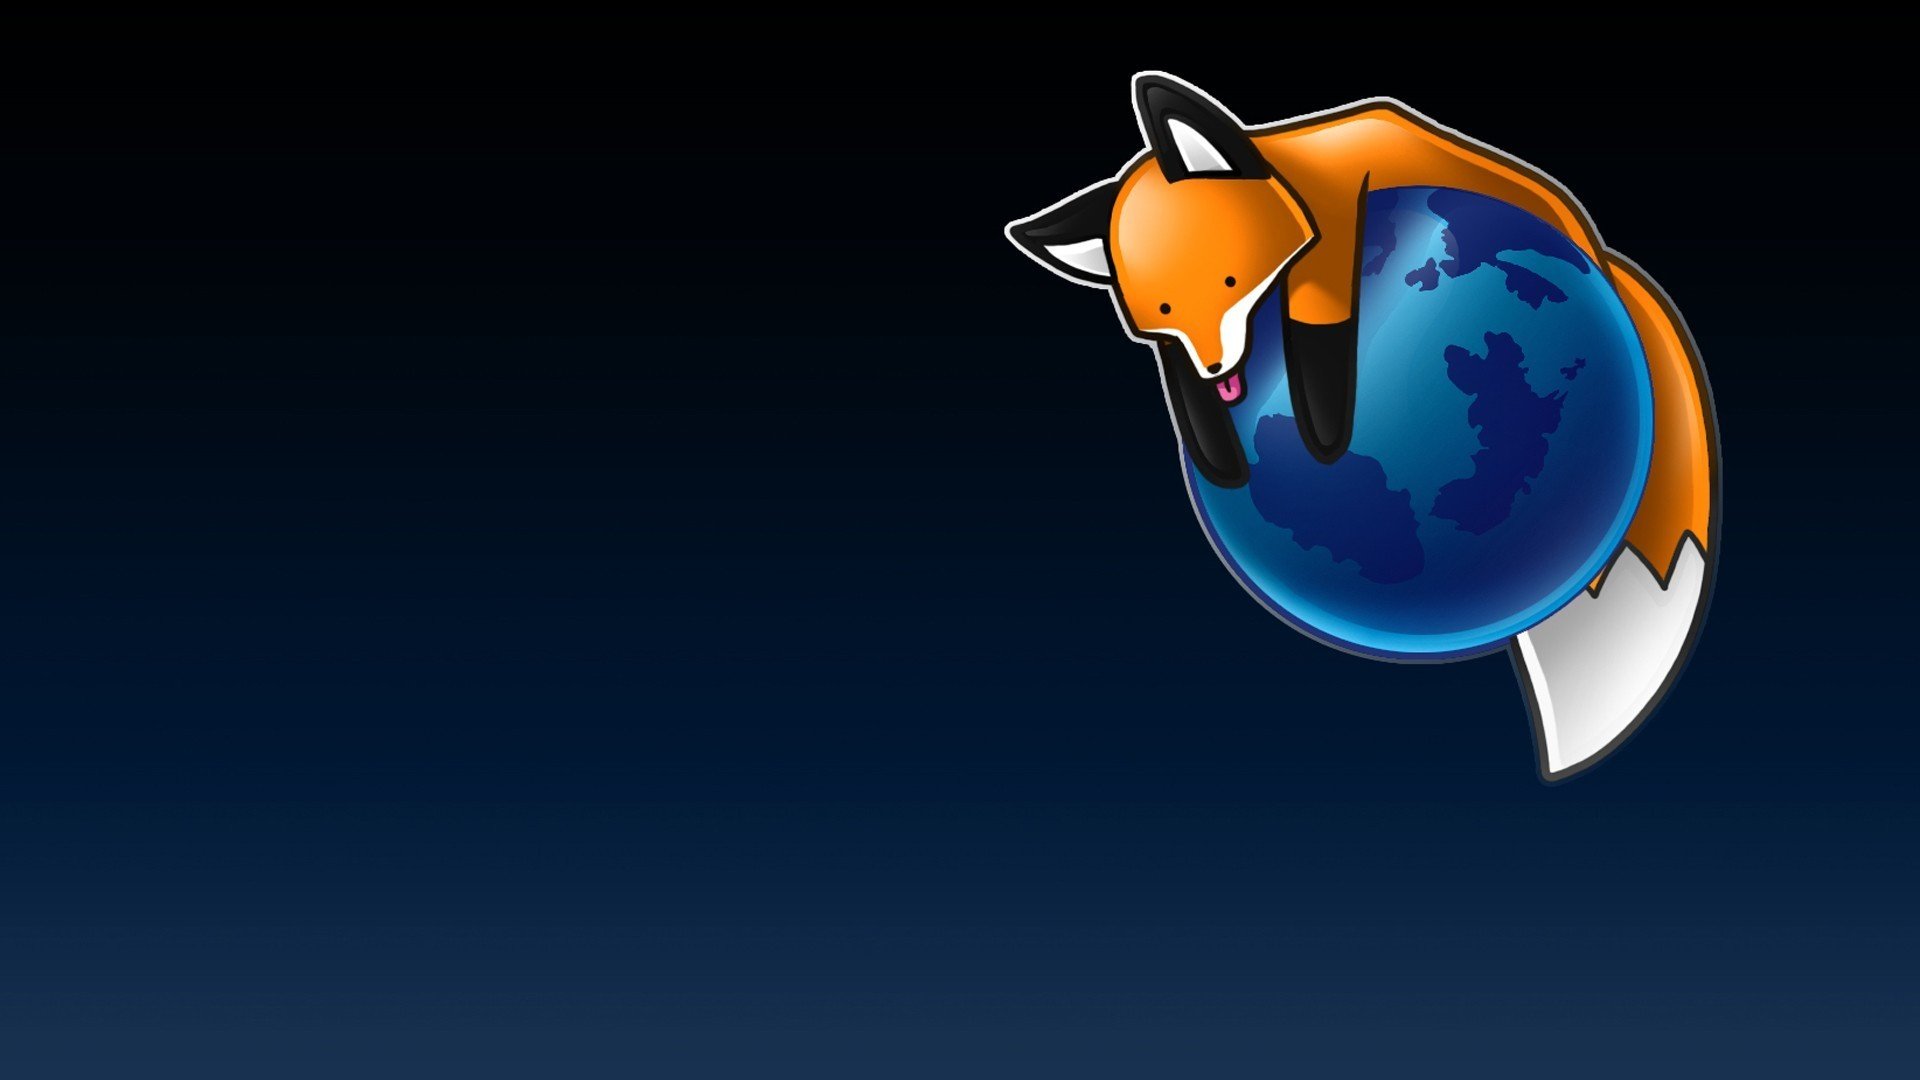 Mozilla Firefox Hd Wallpapers Desktop And Mobile Images Photos